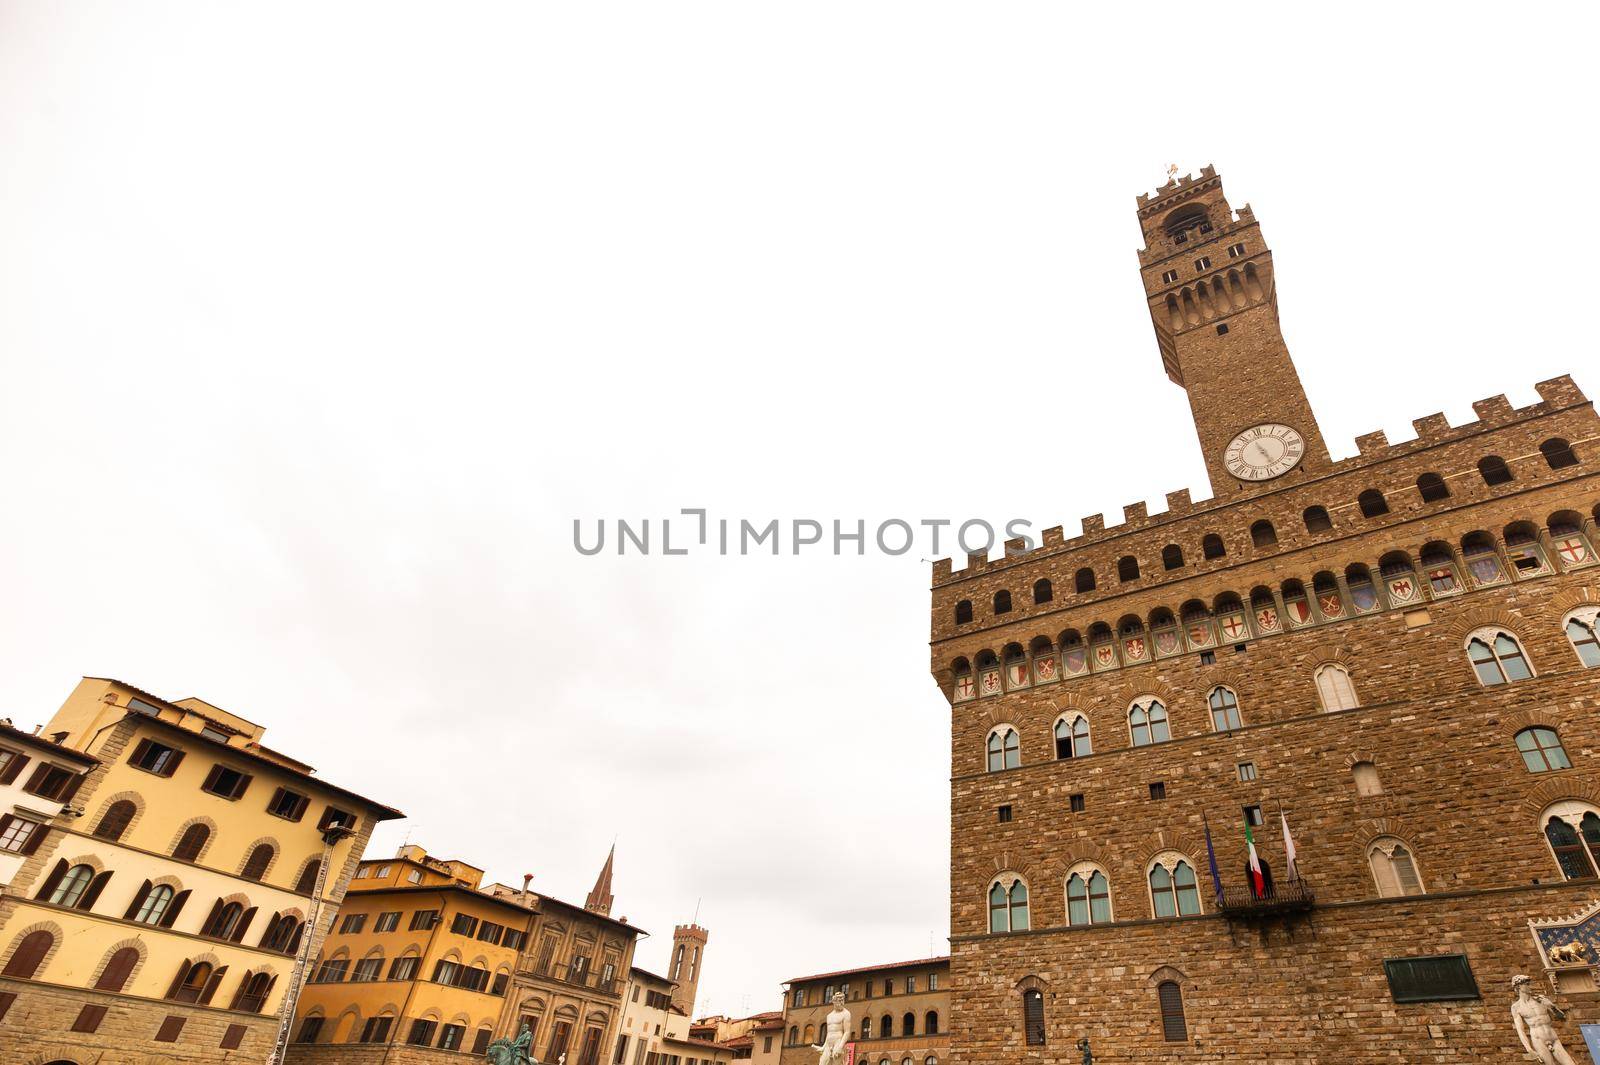 Palazzo Vecchio on Piazza della Signoria, one of the most famous buildings in the city.Florence.Italy.